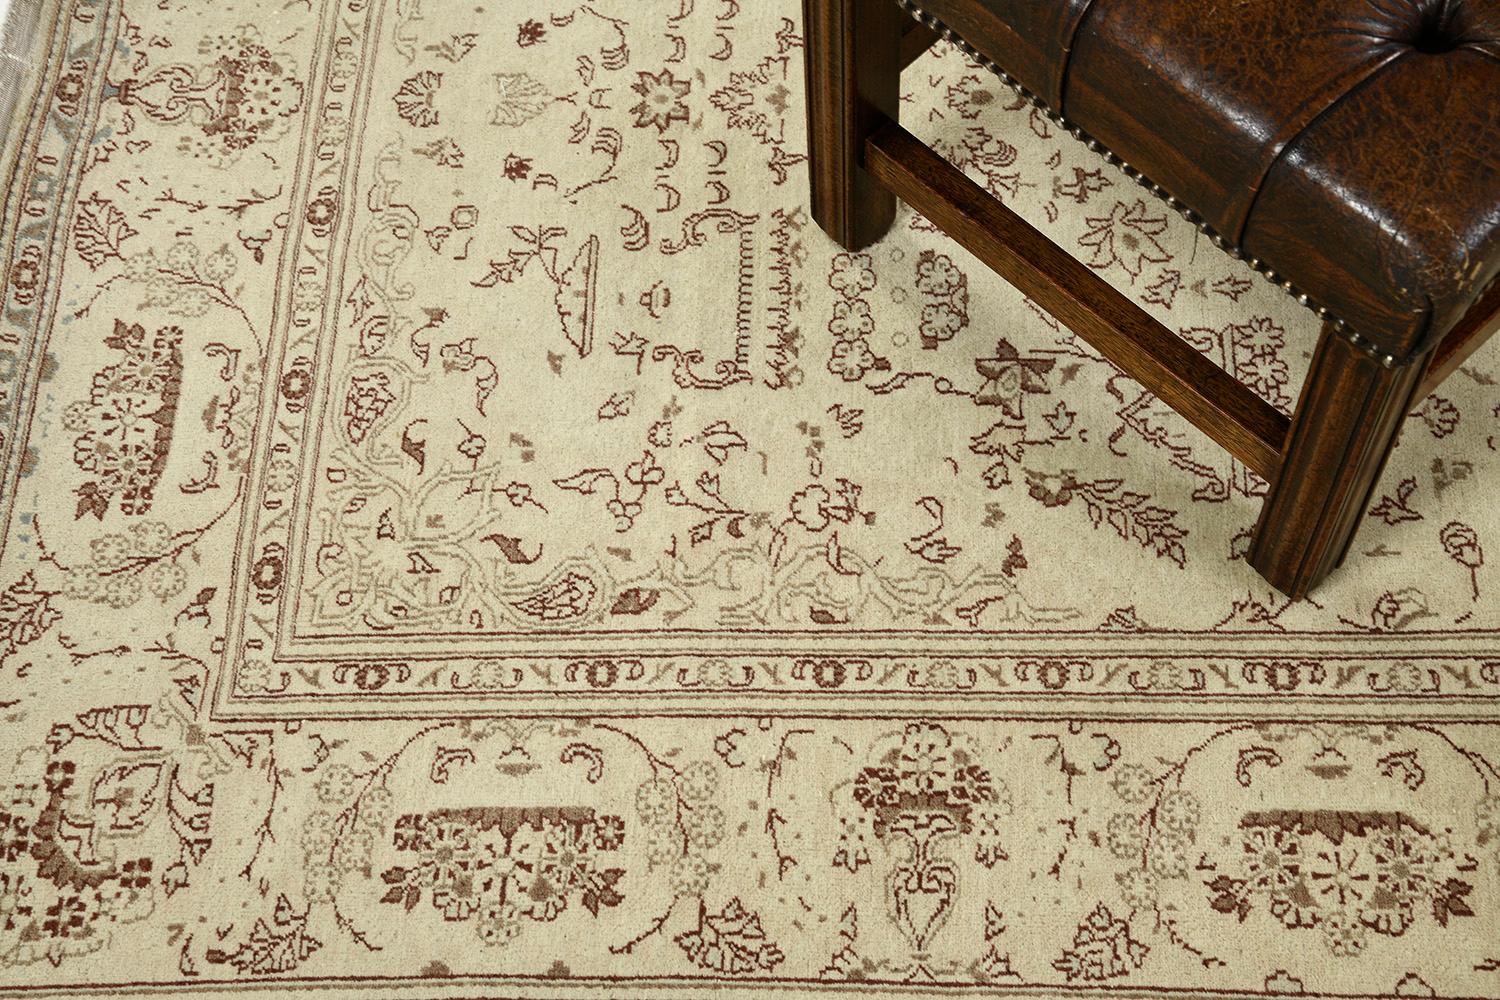 An impressive creation of the Kashan rug that features a penny-worth impact from its every design. At its core, majestically presents a detailed medallion-shaped floral theme, symbolic motifs, and leafy scrolls. An effortless combination of various